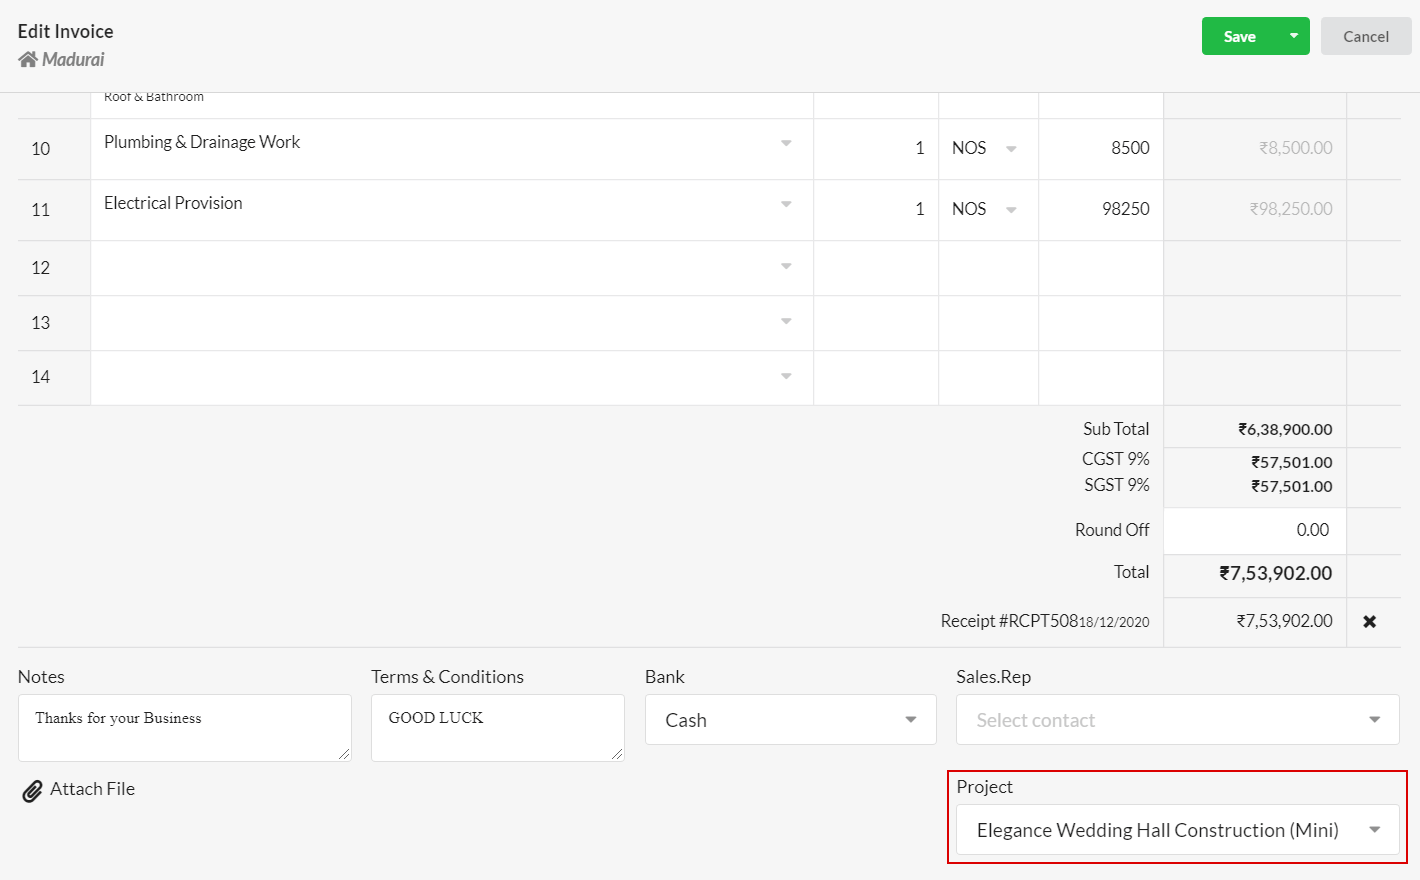 Adding Invoice with Items for Project